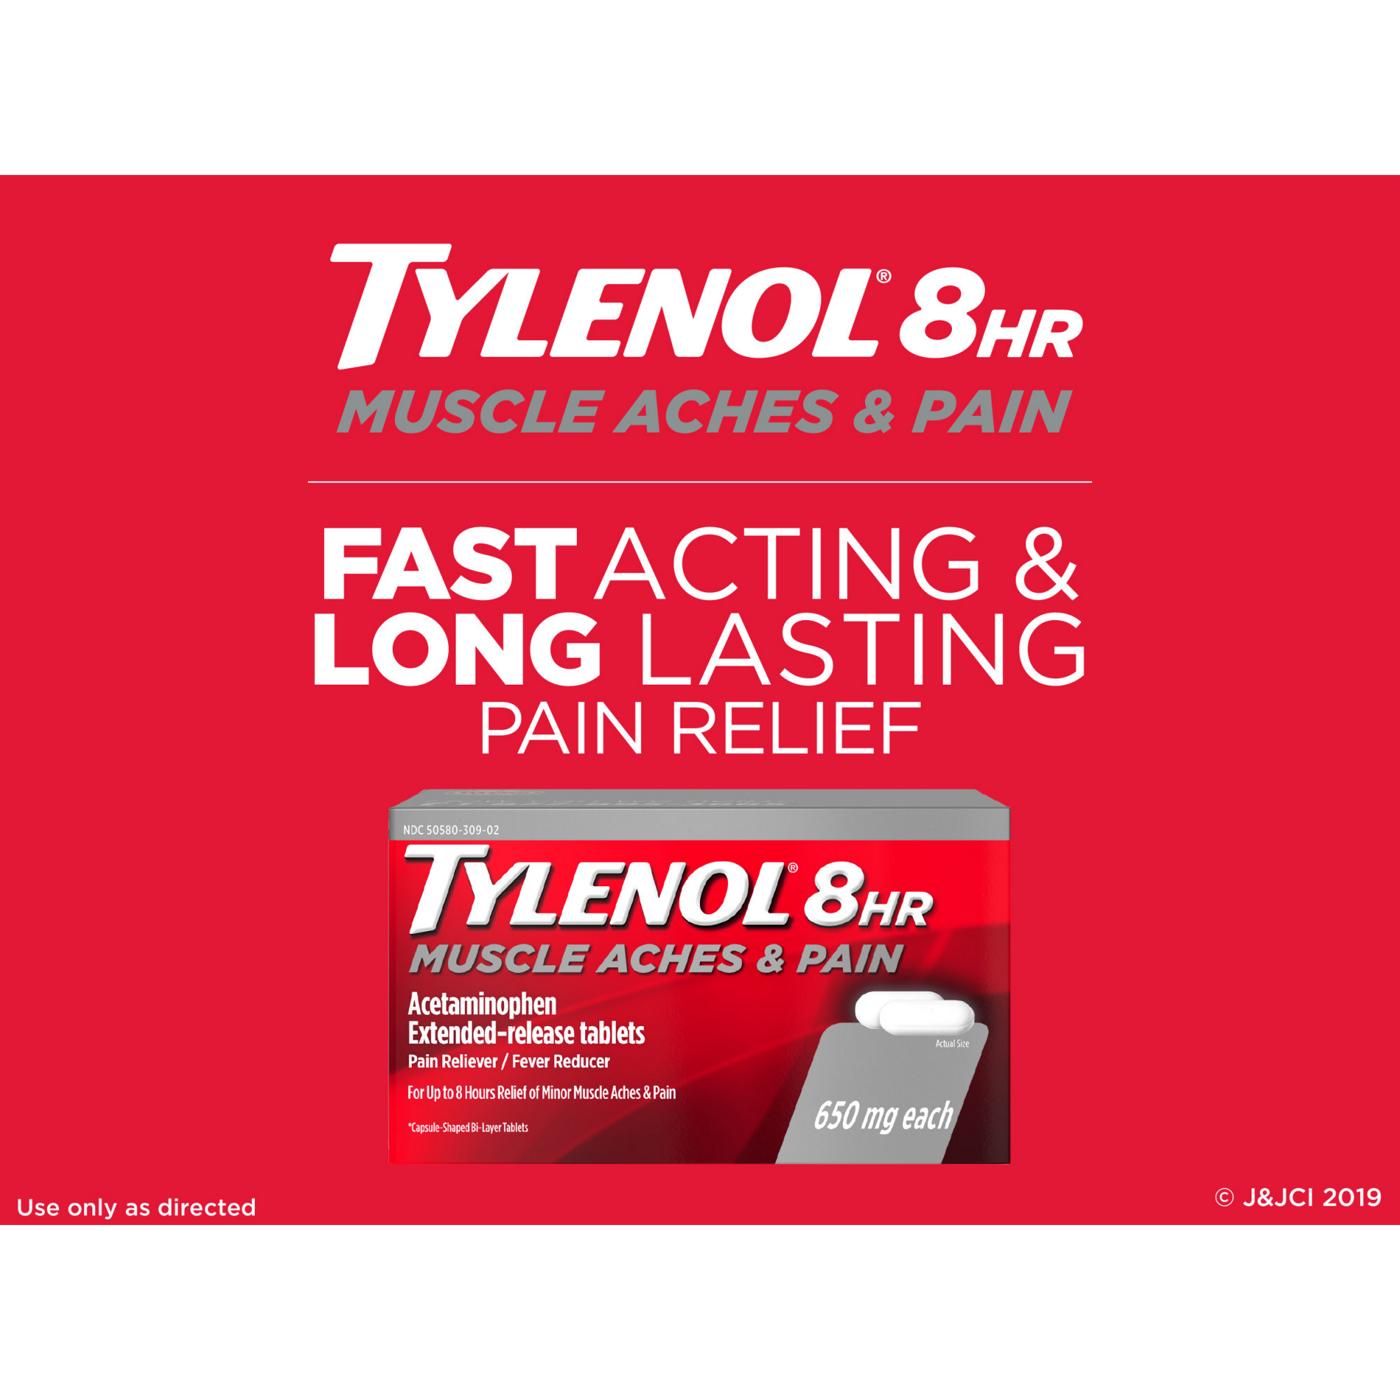 Tylenol 8 HR Muscle Aches & Pains - 650 mg; image 5 of 8